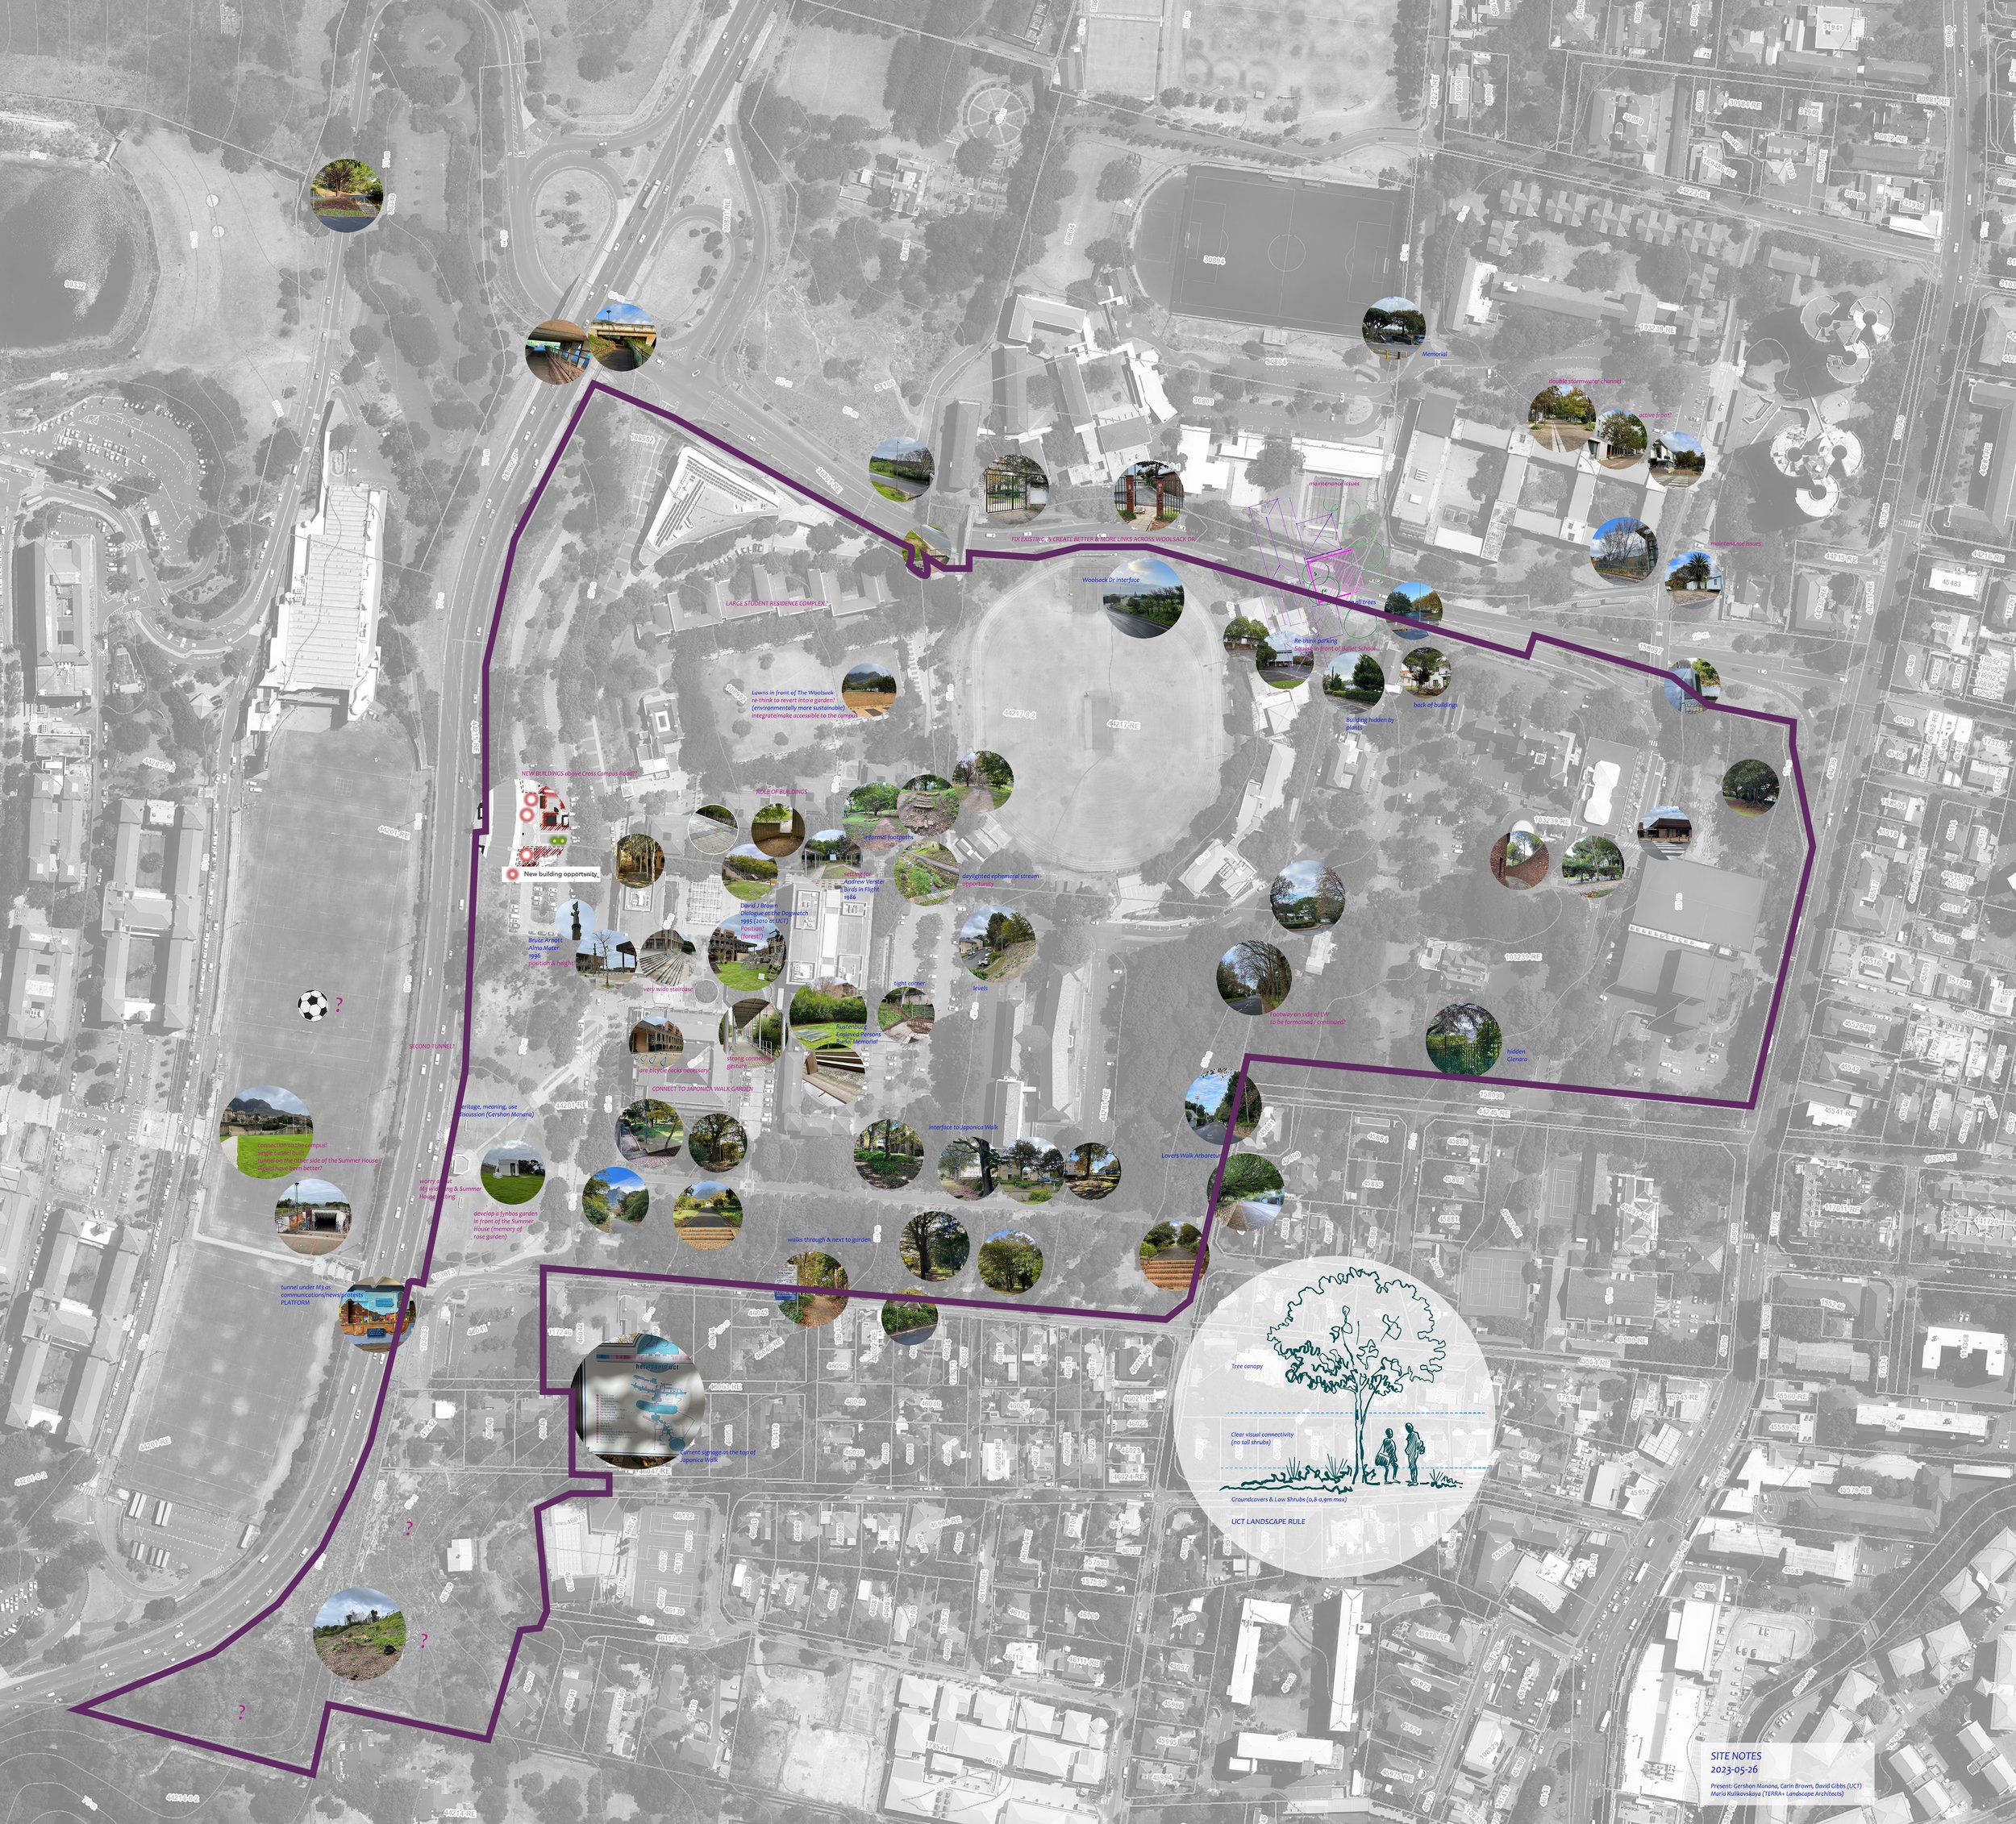  In contrast to the well-defined Upper Campus, the Middle and Lower Campus faces spatial challenges characterized by a lack of clear planning and connectivity. Heritage assessments, though cautious, have contributed to an ill-defined campus layout wi